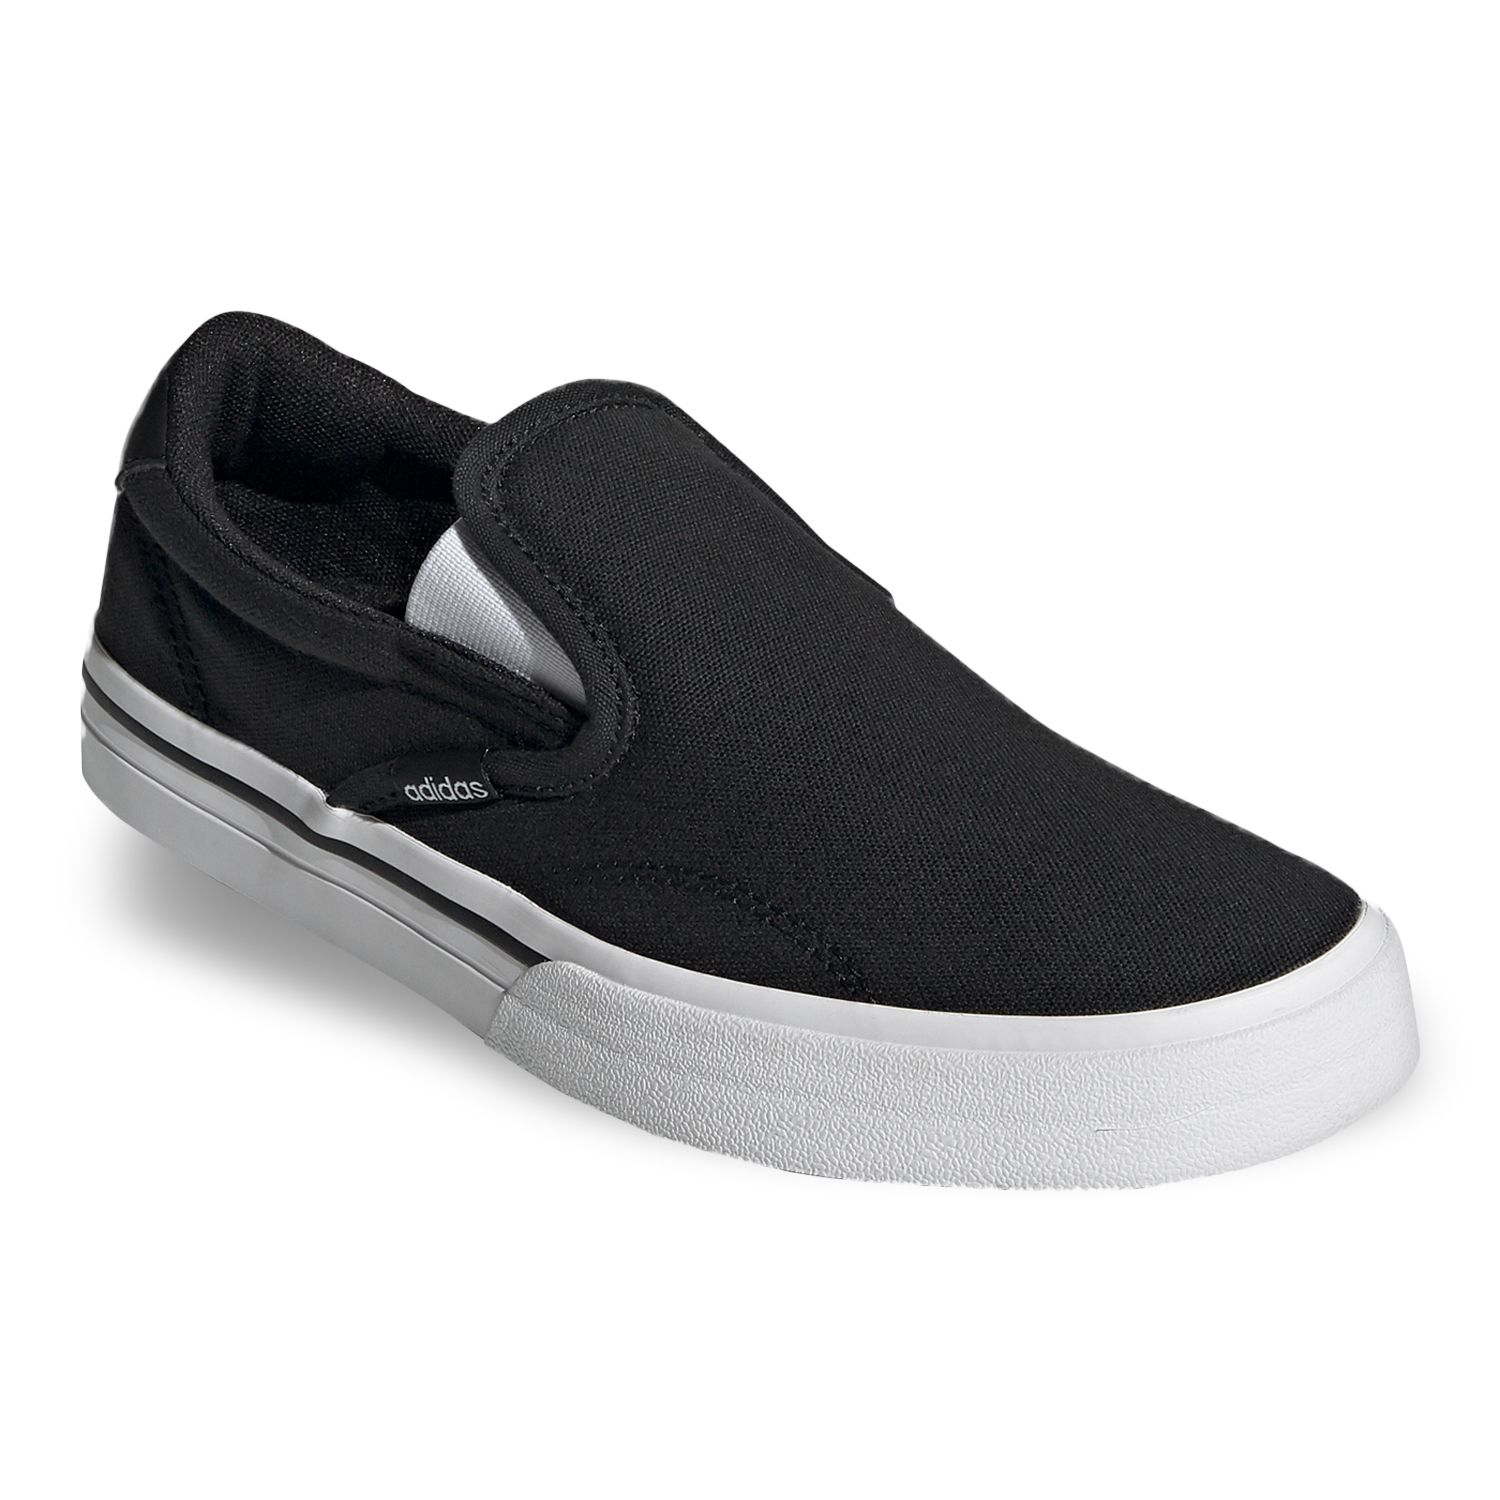 slip on athletic shoes womens